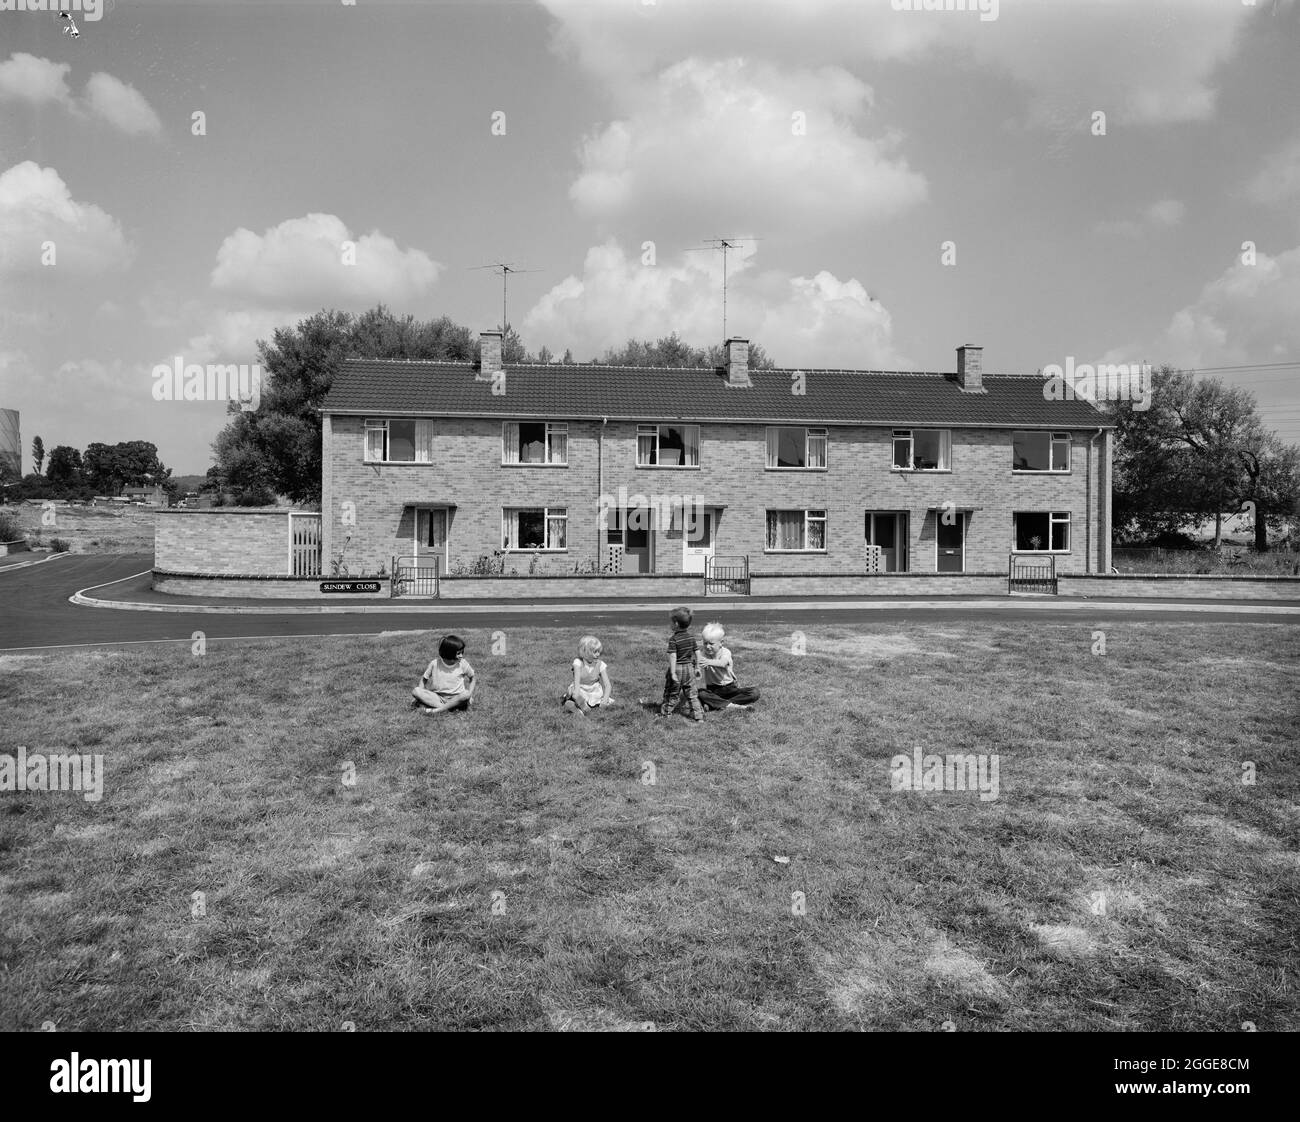 A group of children playing on the grass infront of a row of terraced Easiform houses on Sundew Close. 'Easiform' was a method of in situ pre-cast concrete construction which John Laing and Son Ltd developed from 1919 onwards. Stock Photo